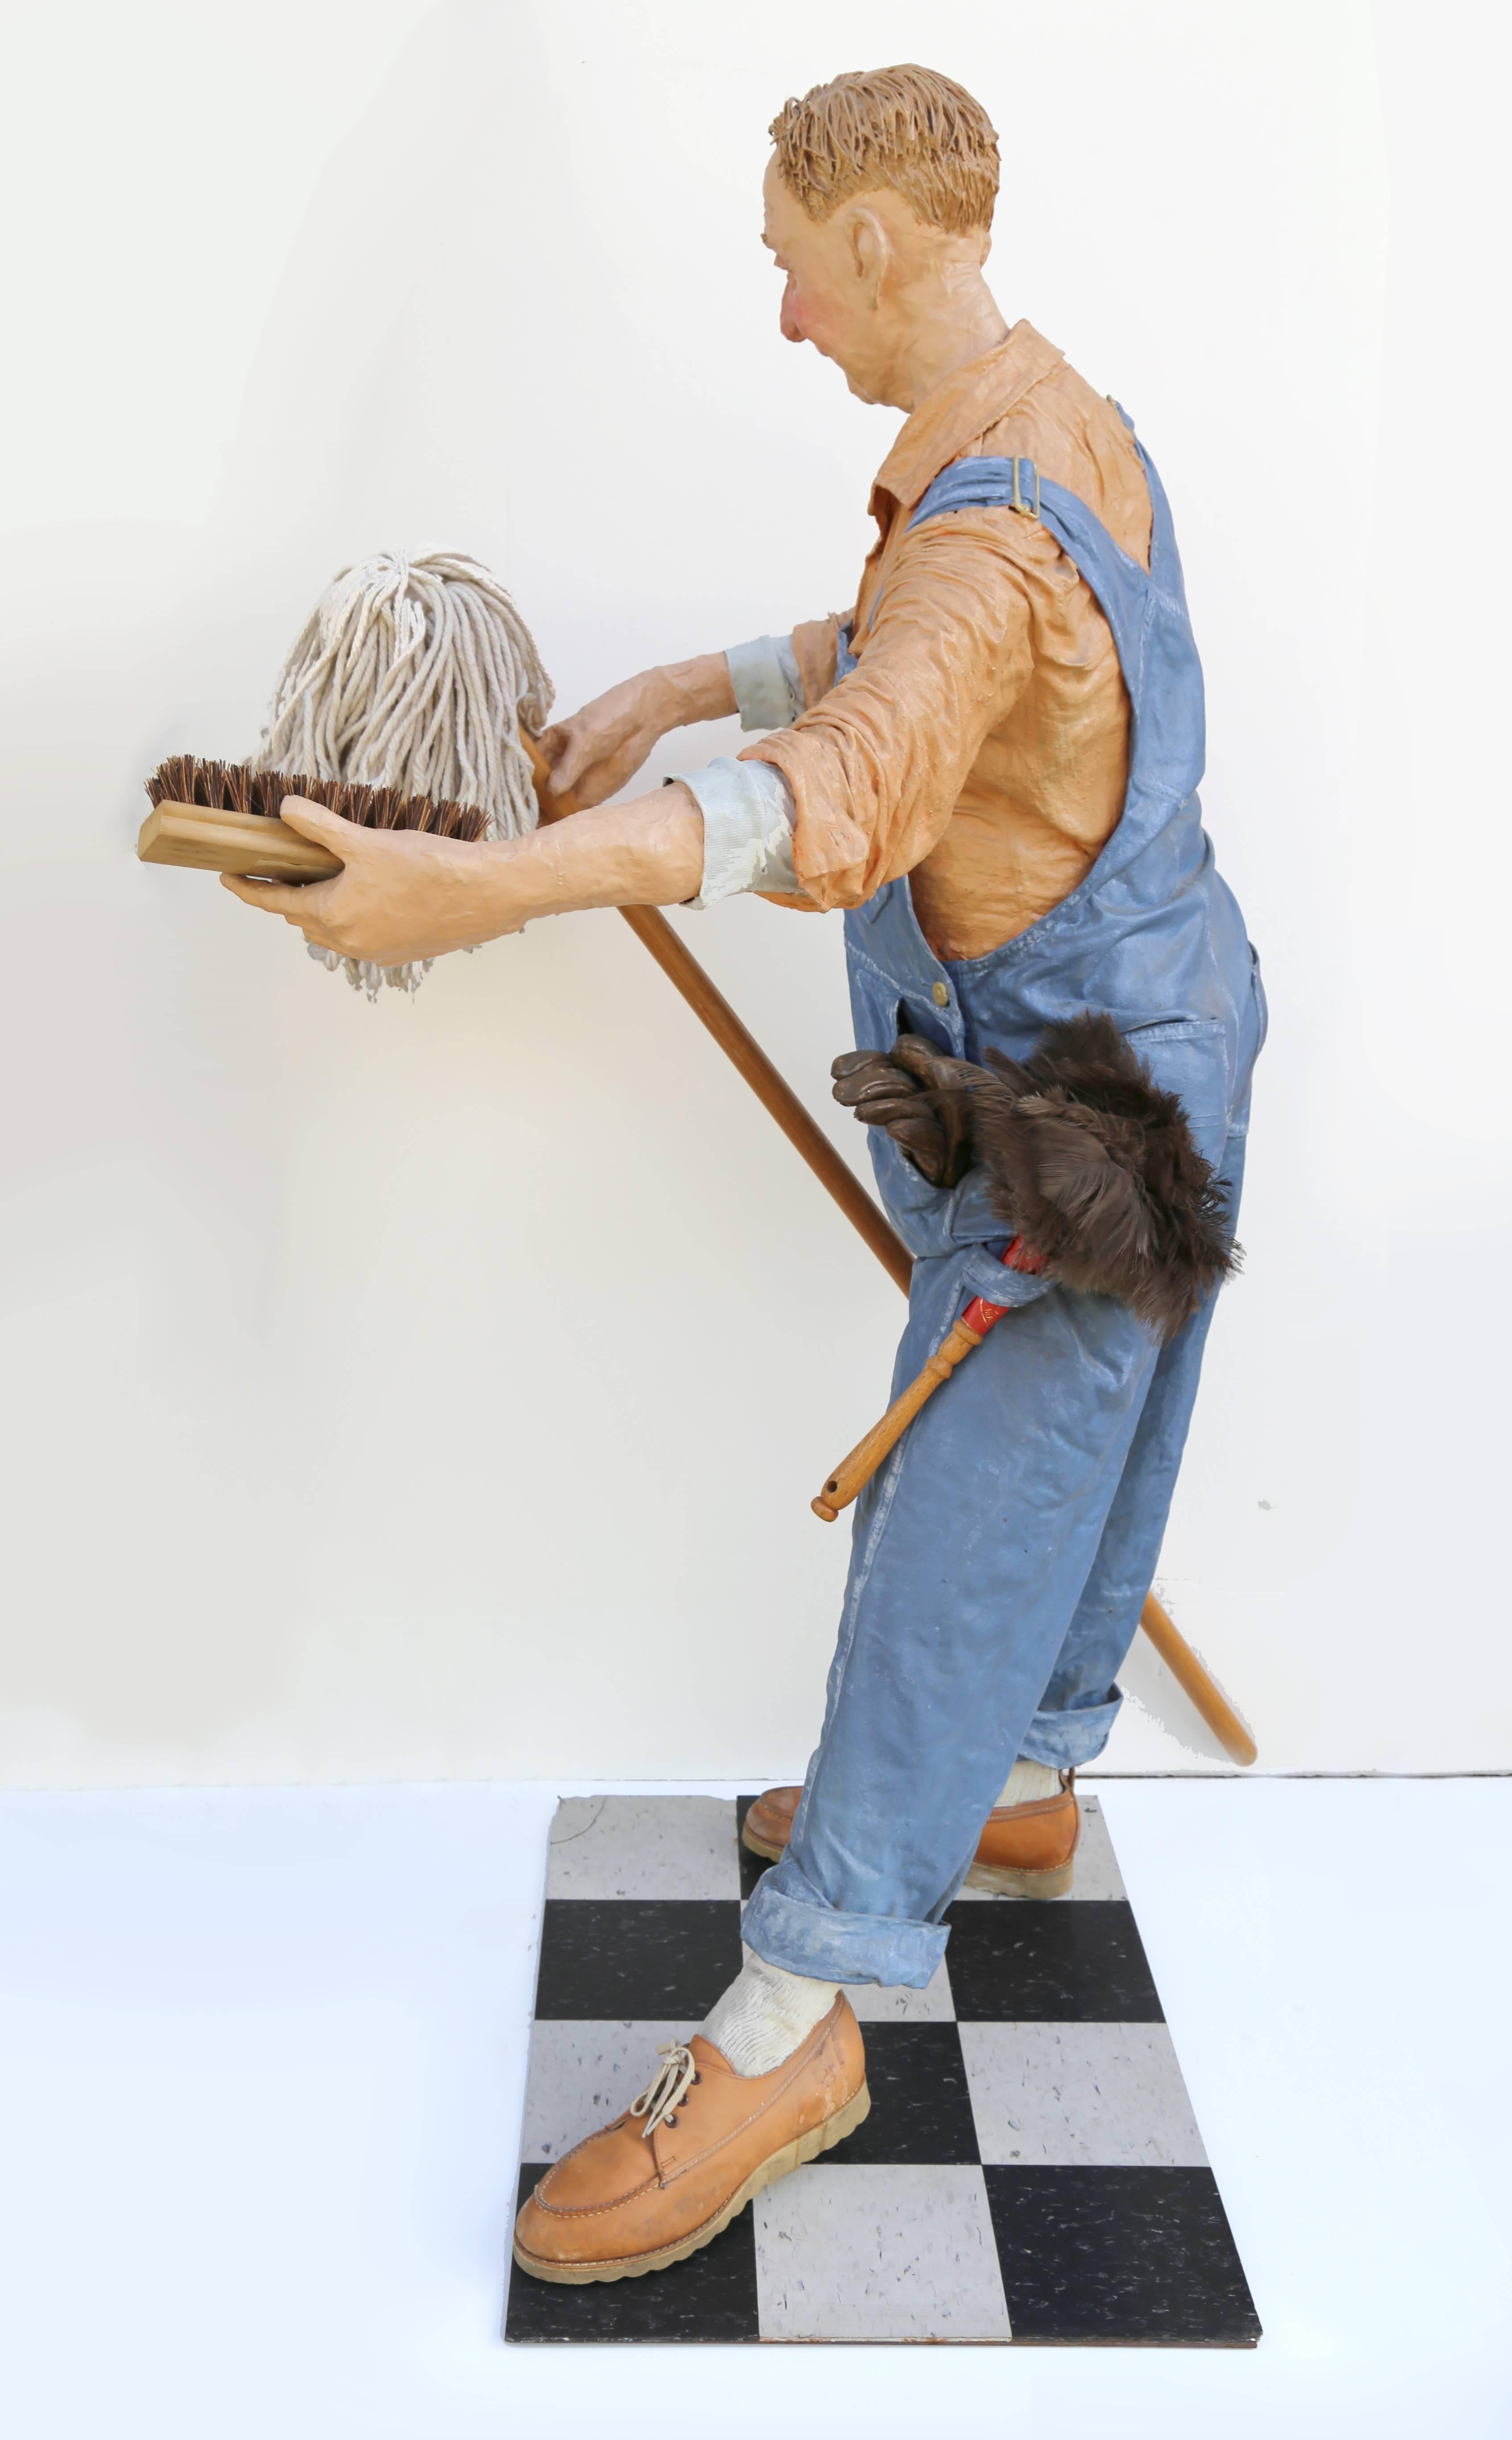 Artist: Kay Ritter
Title: Janitor
Medium: Painted Papier-mache on Metal Base, with mop, duster, scrubbing brush, and key chain
Year: c. 1983
Size: 52  x 28  x 30 in. (132.08  x 71.12  x 76.2 cm)